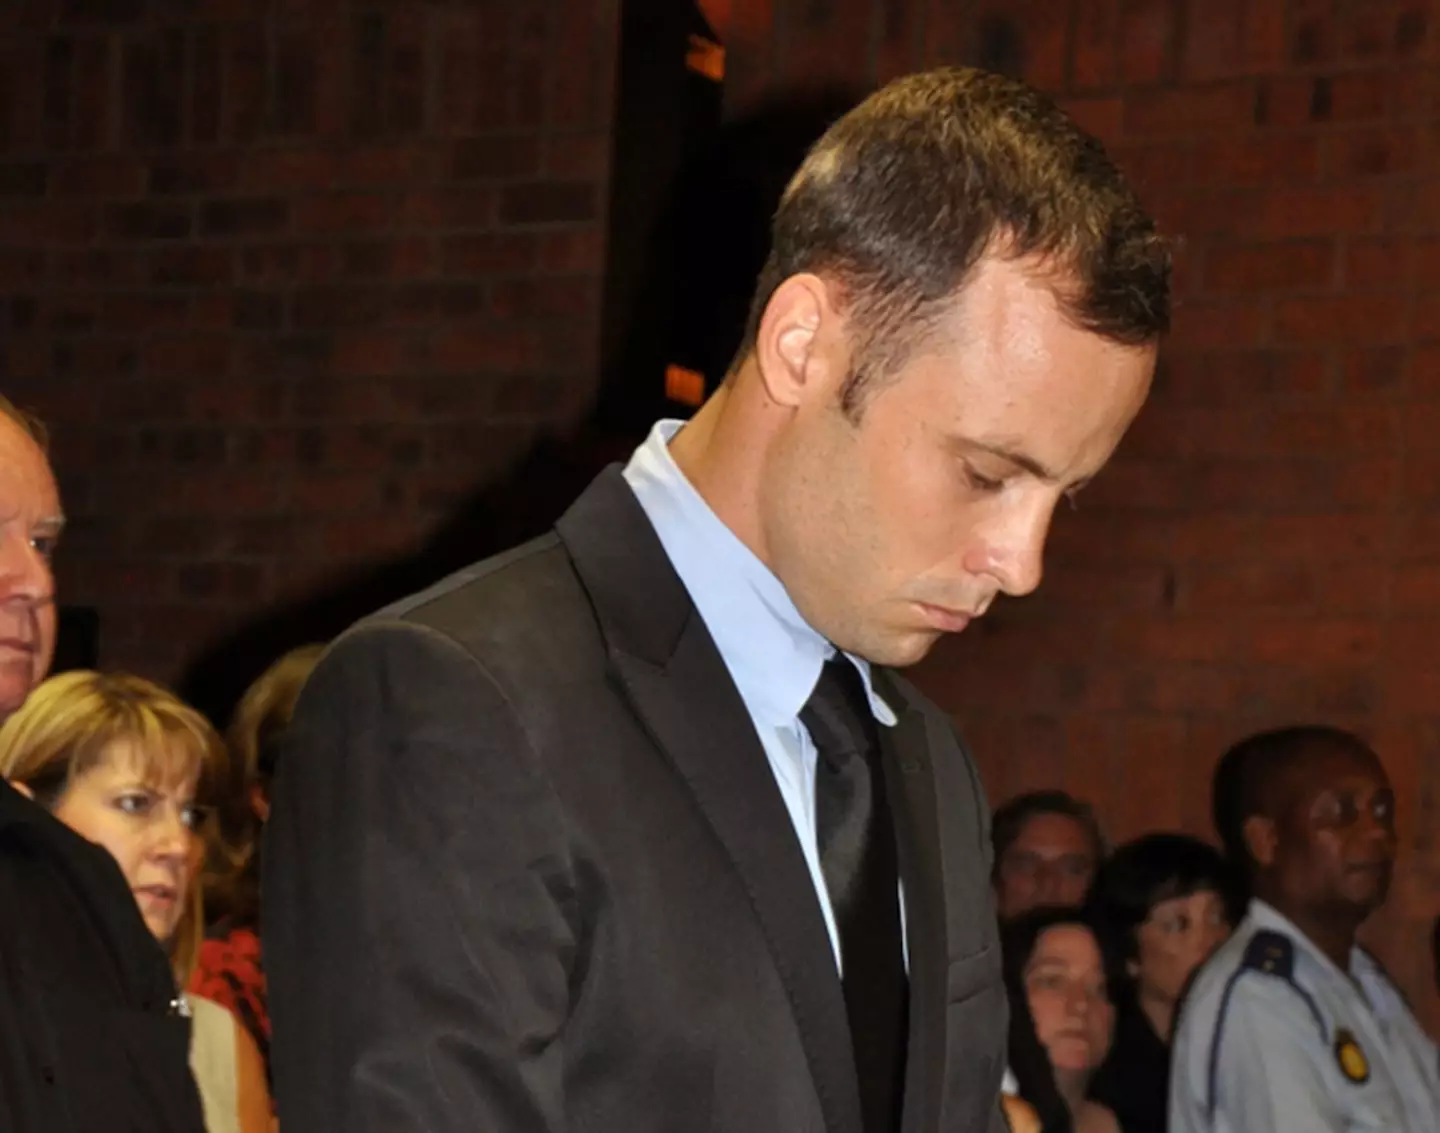 Pistorius claimed the shooting was an accident.